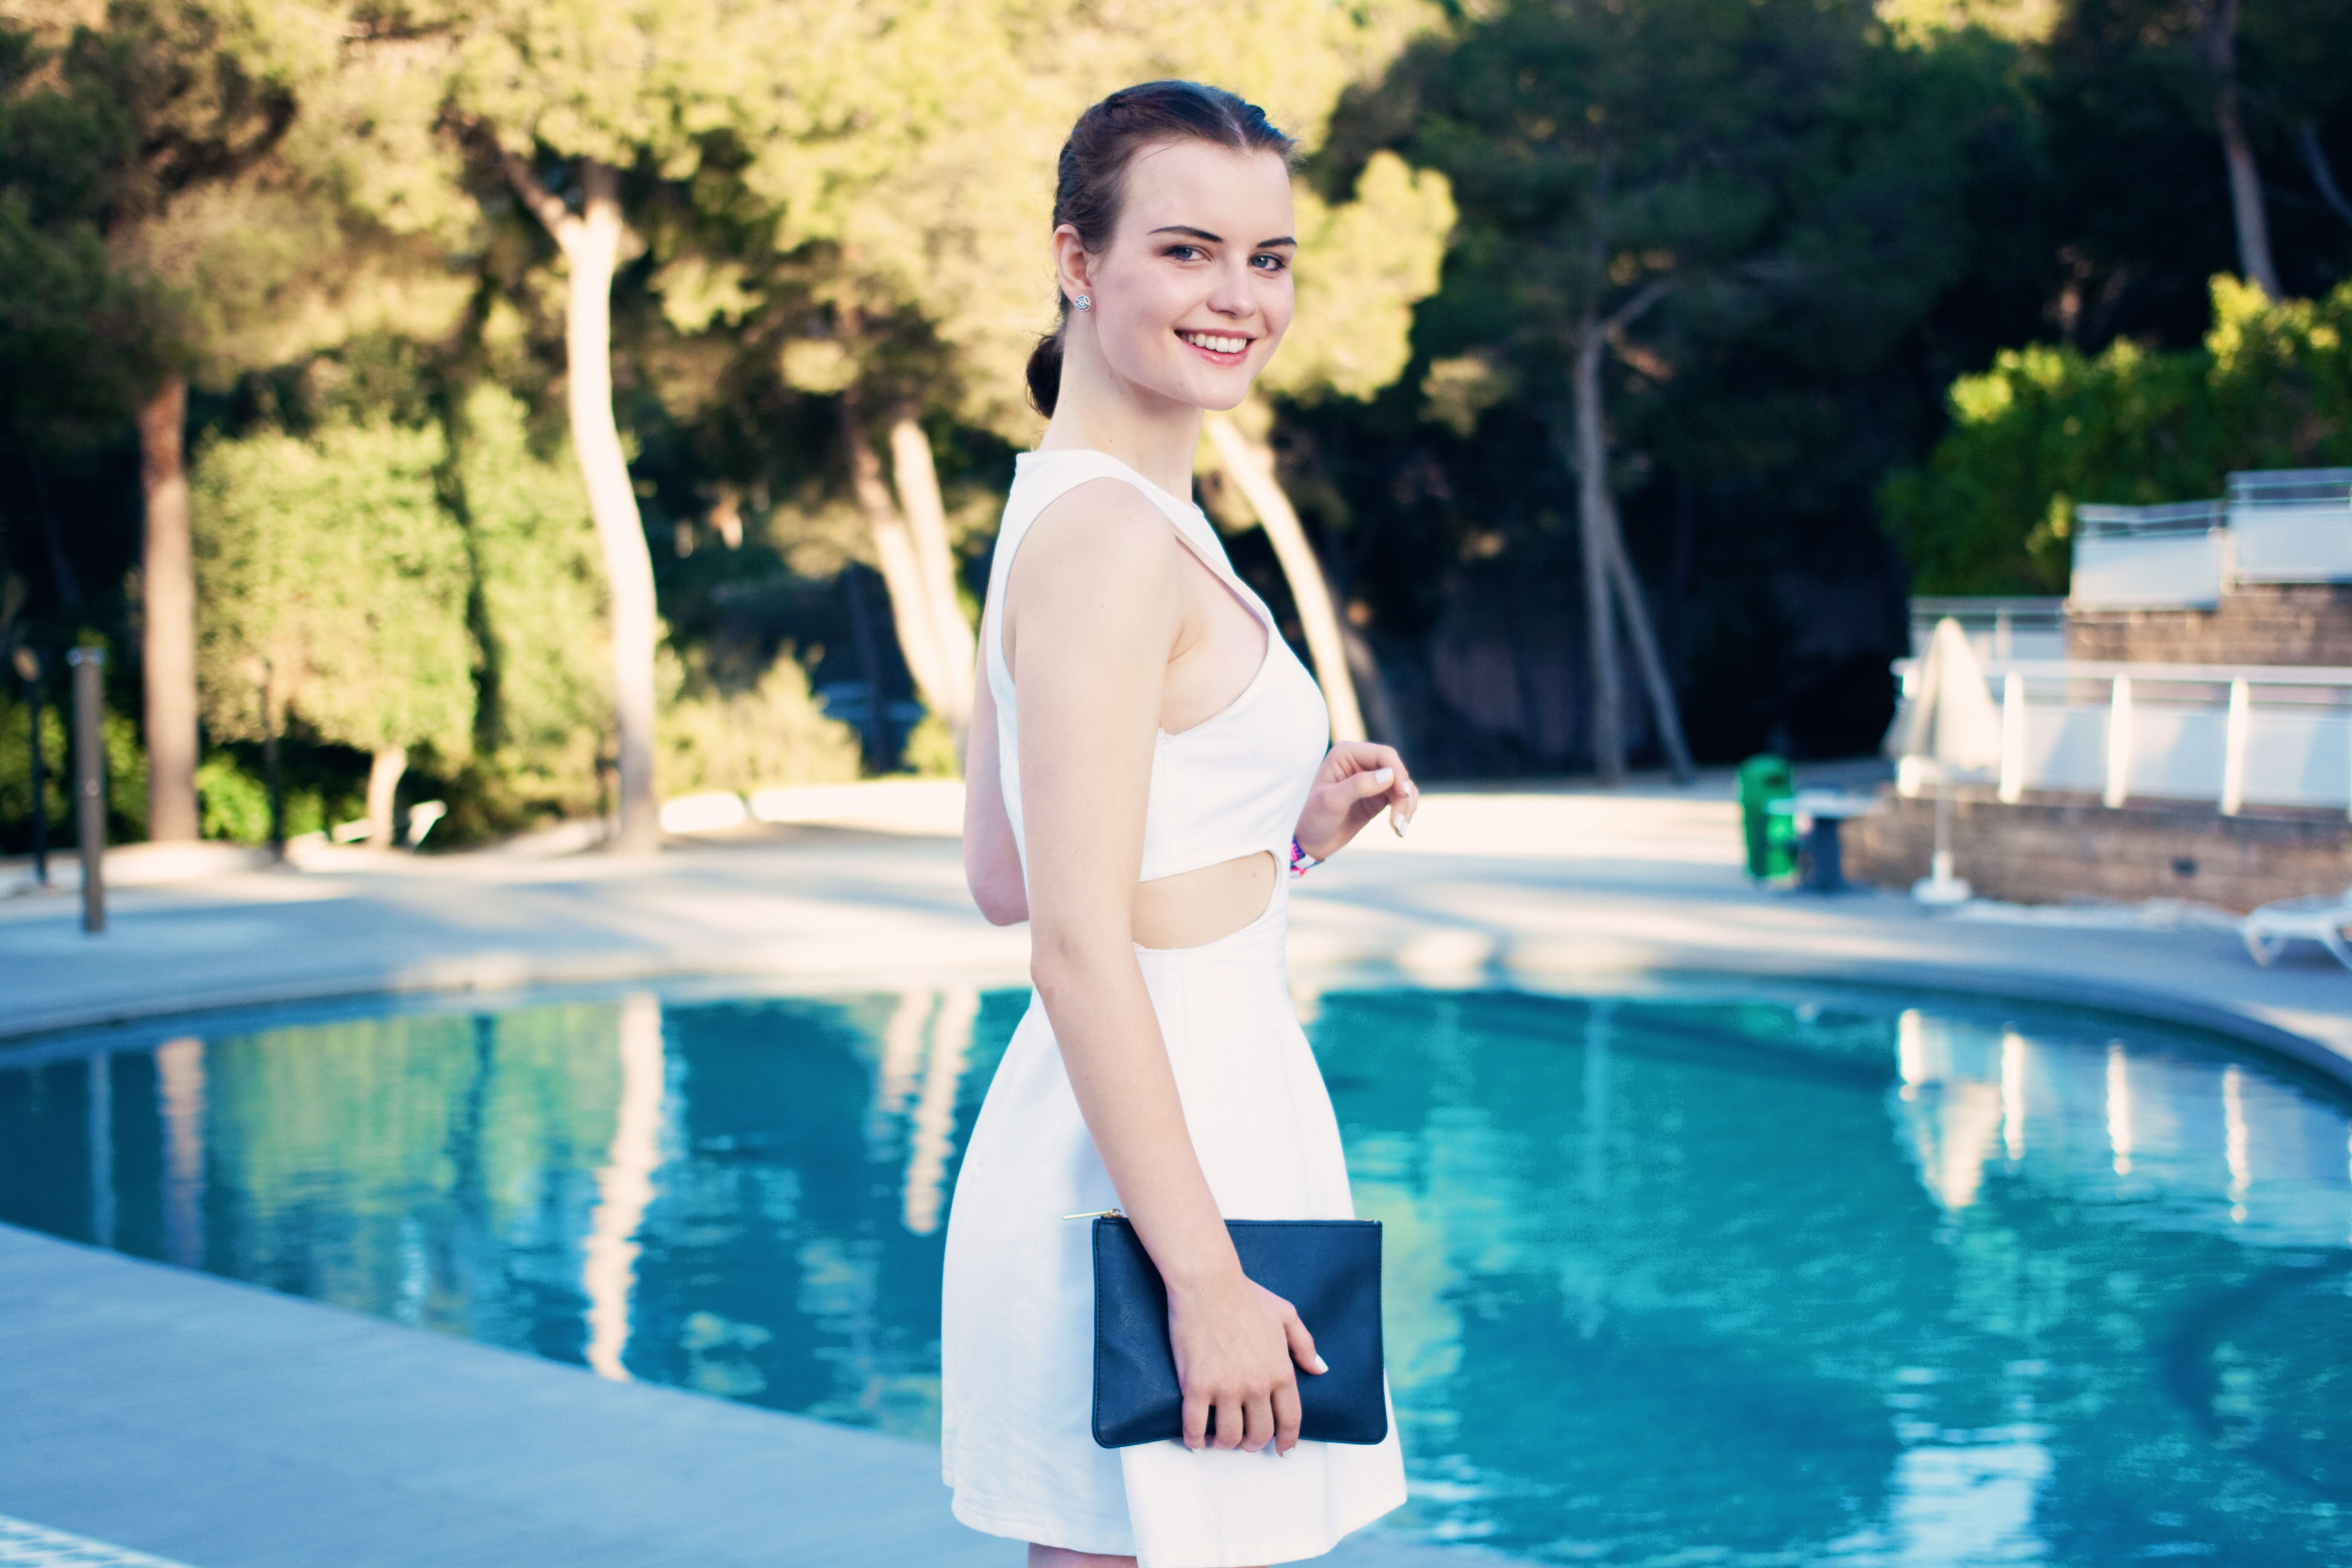 Teen girl portrait by pool. Glam summer outfit